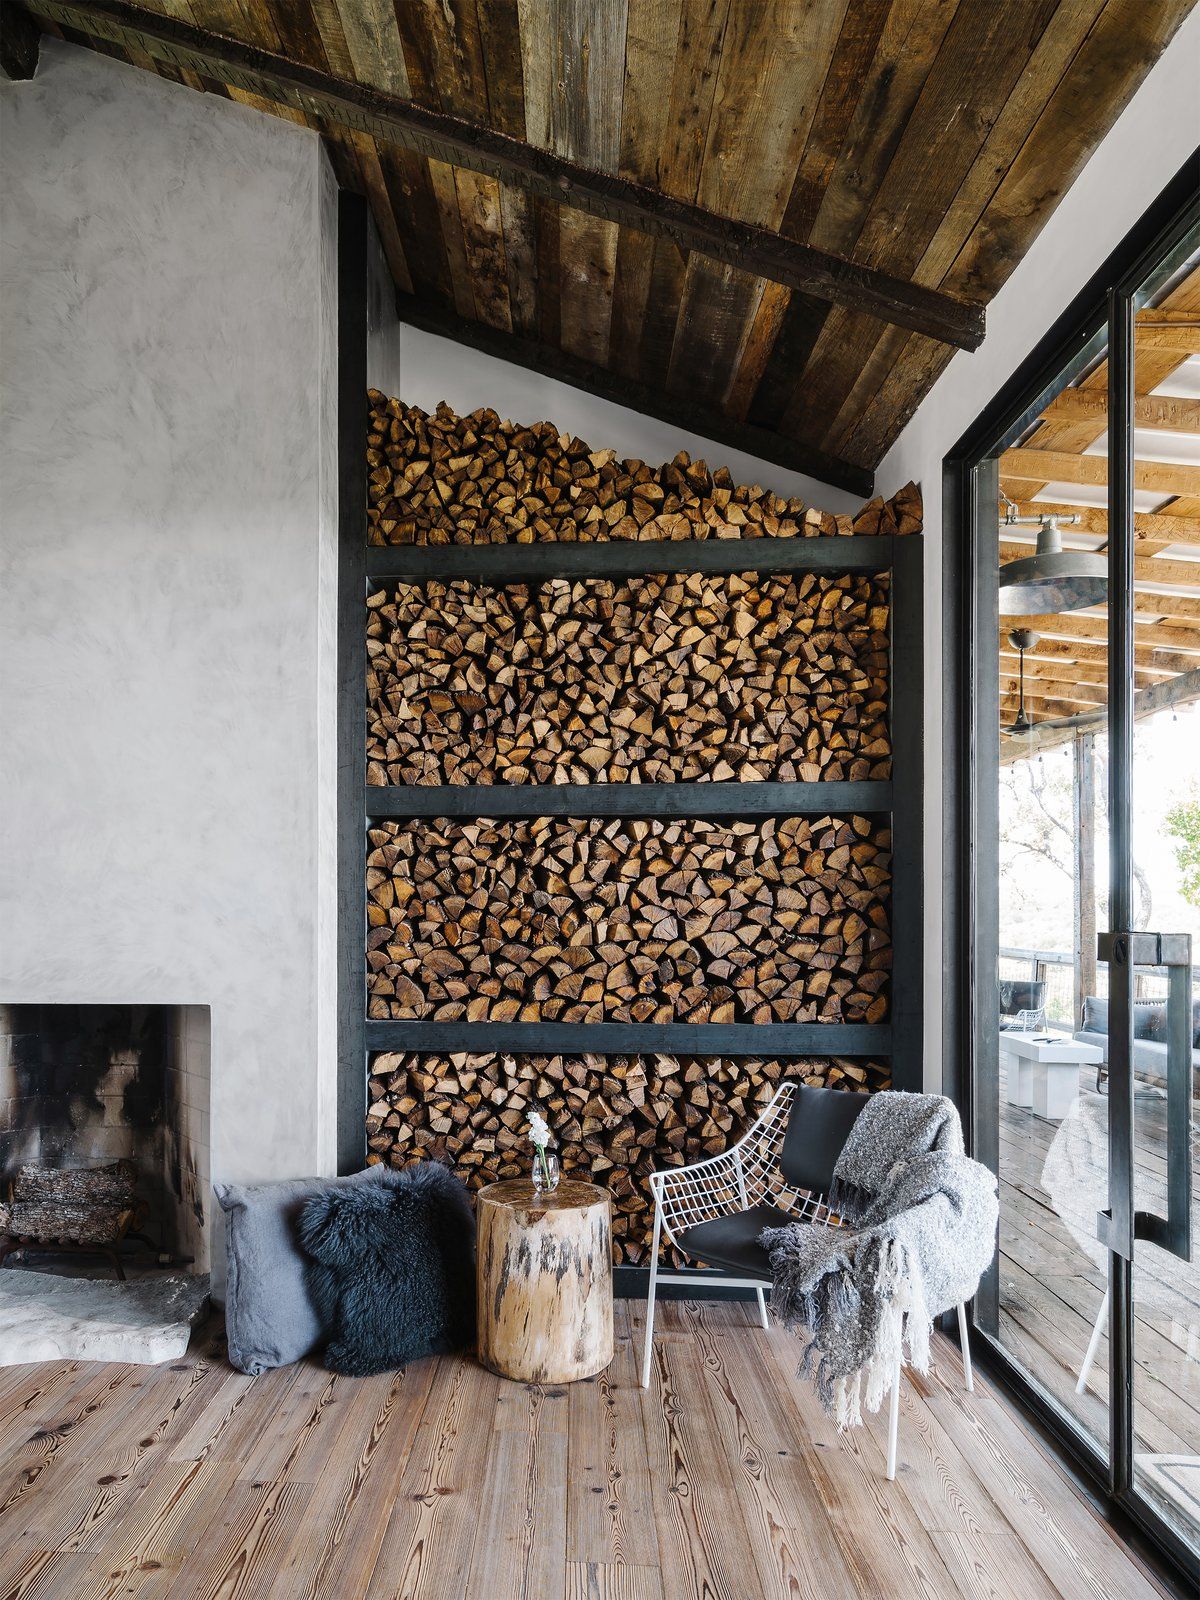 The living room features a concrete clad fireplace, a sitting zone by the window and a firewood storage